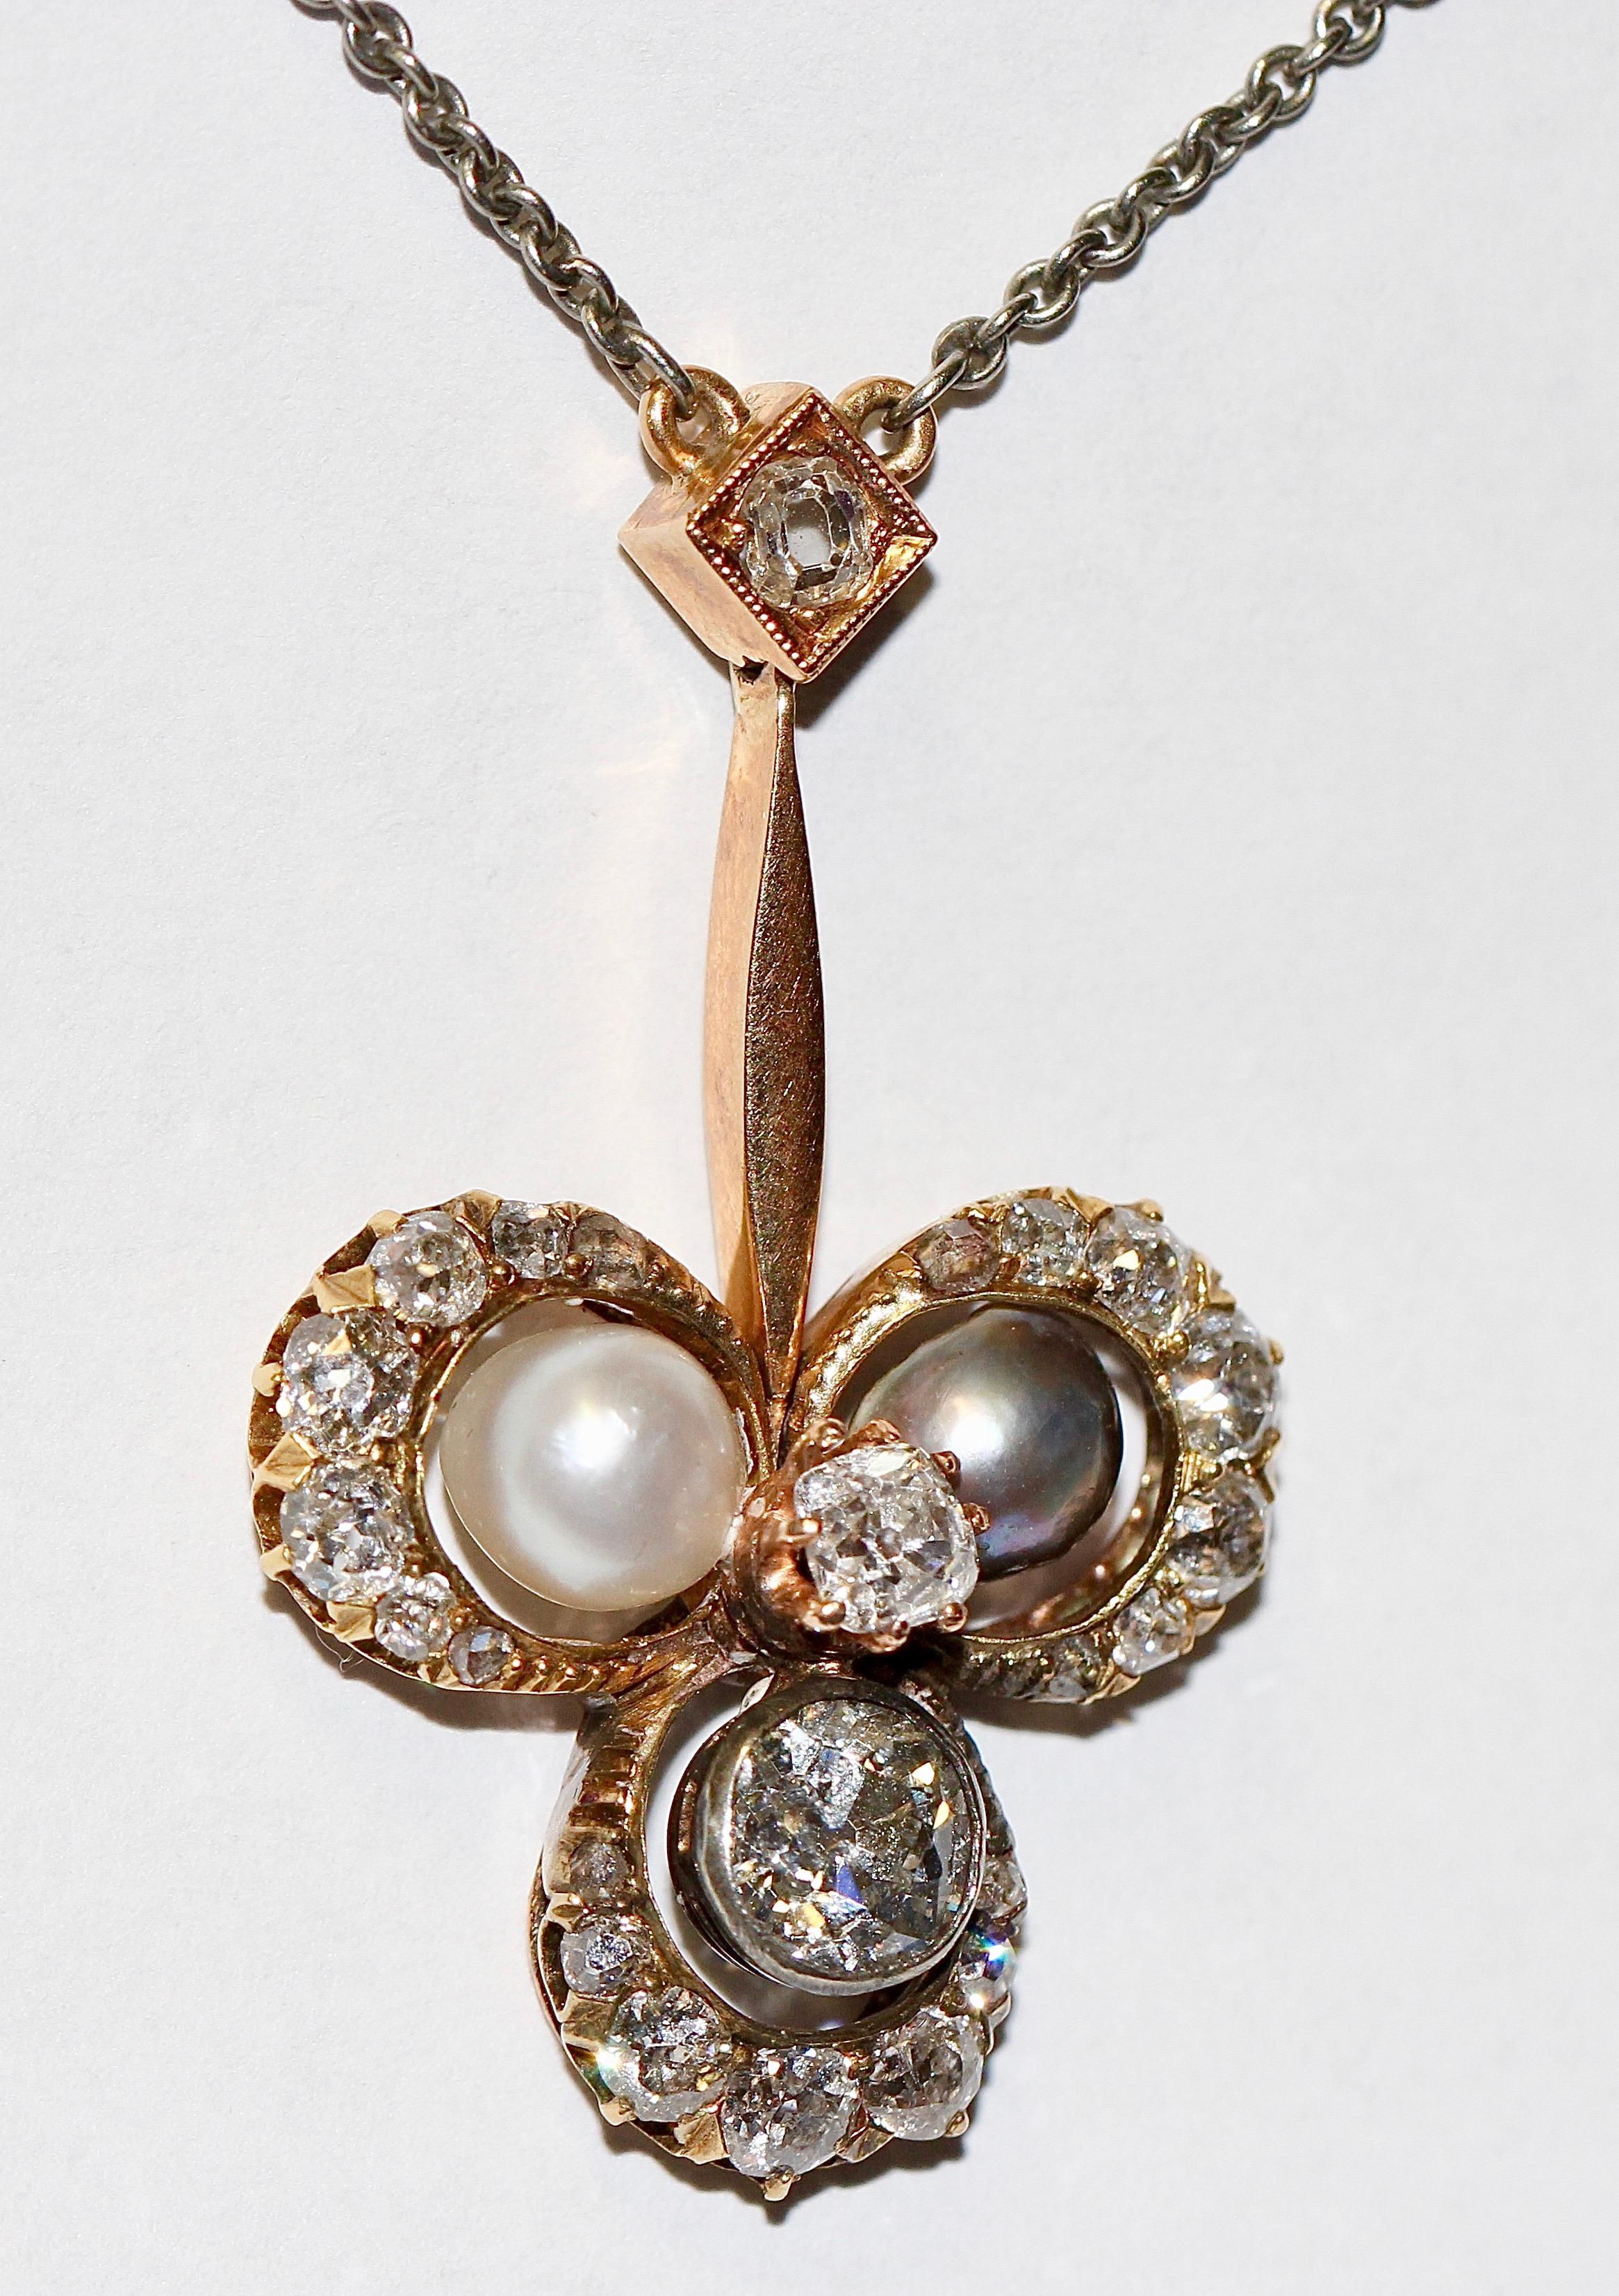 Antique Art Nouveau Gold Necklace, with Diamonds and Natural Pearls.

The big central diamond weighs about 0.6 carat.


Width and High refer to the pendant (without chain).